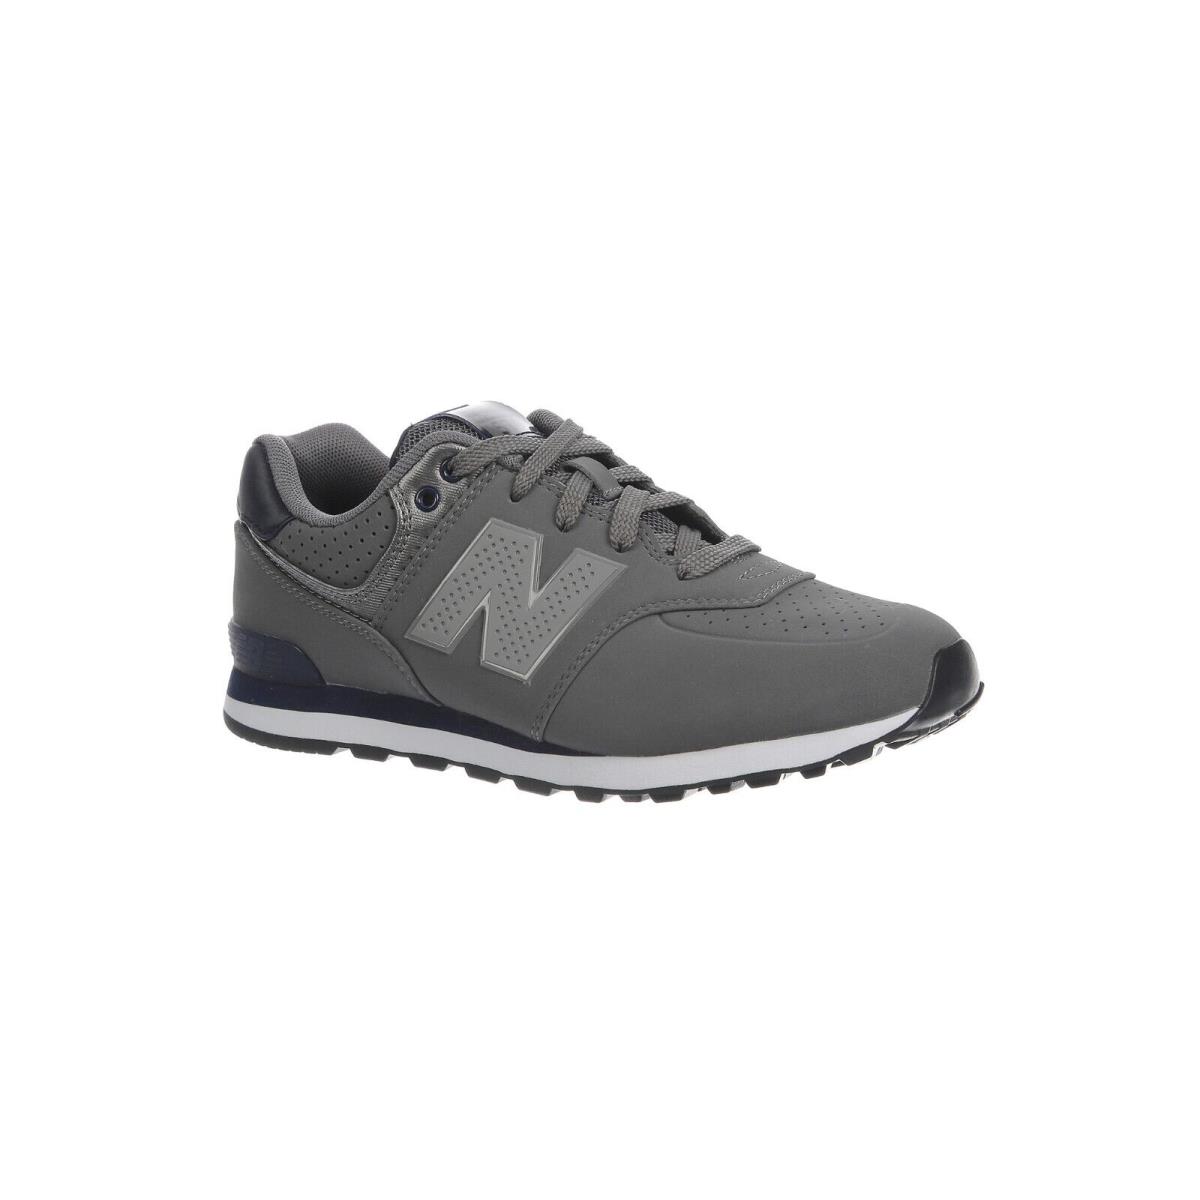 New Balance 574 Big Kids Running Shoes Sneakers KL574A6G - Charcoal/navy